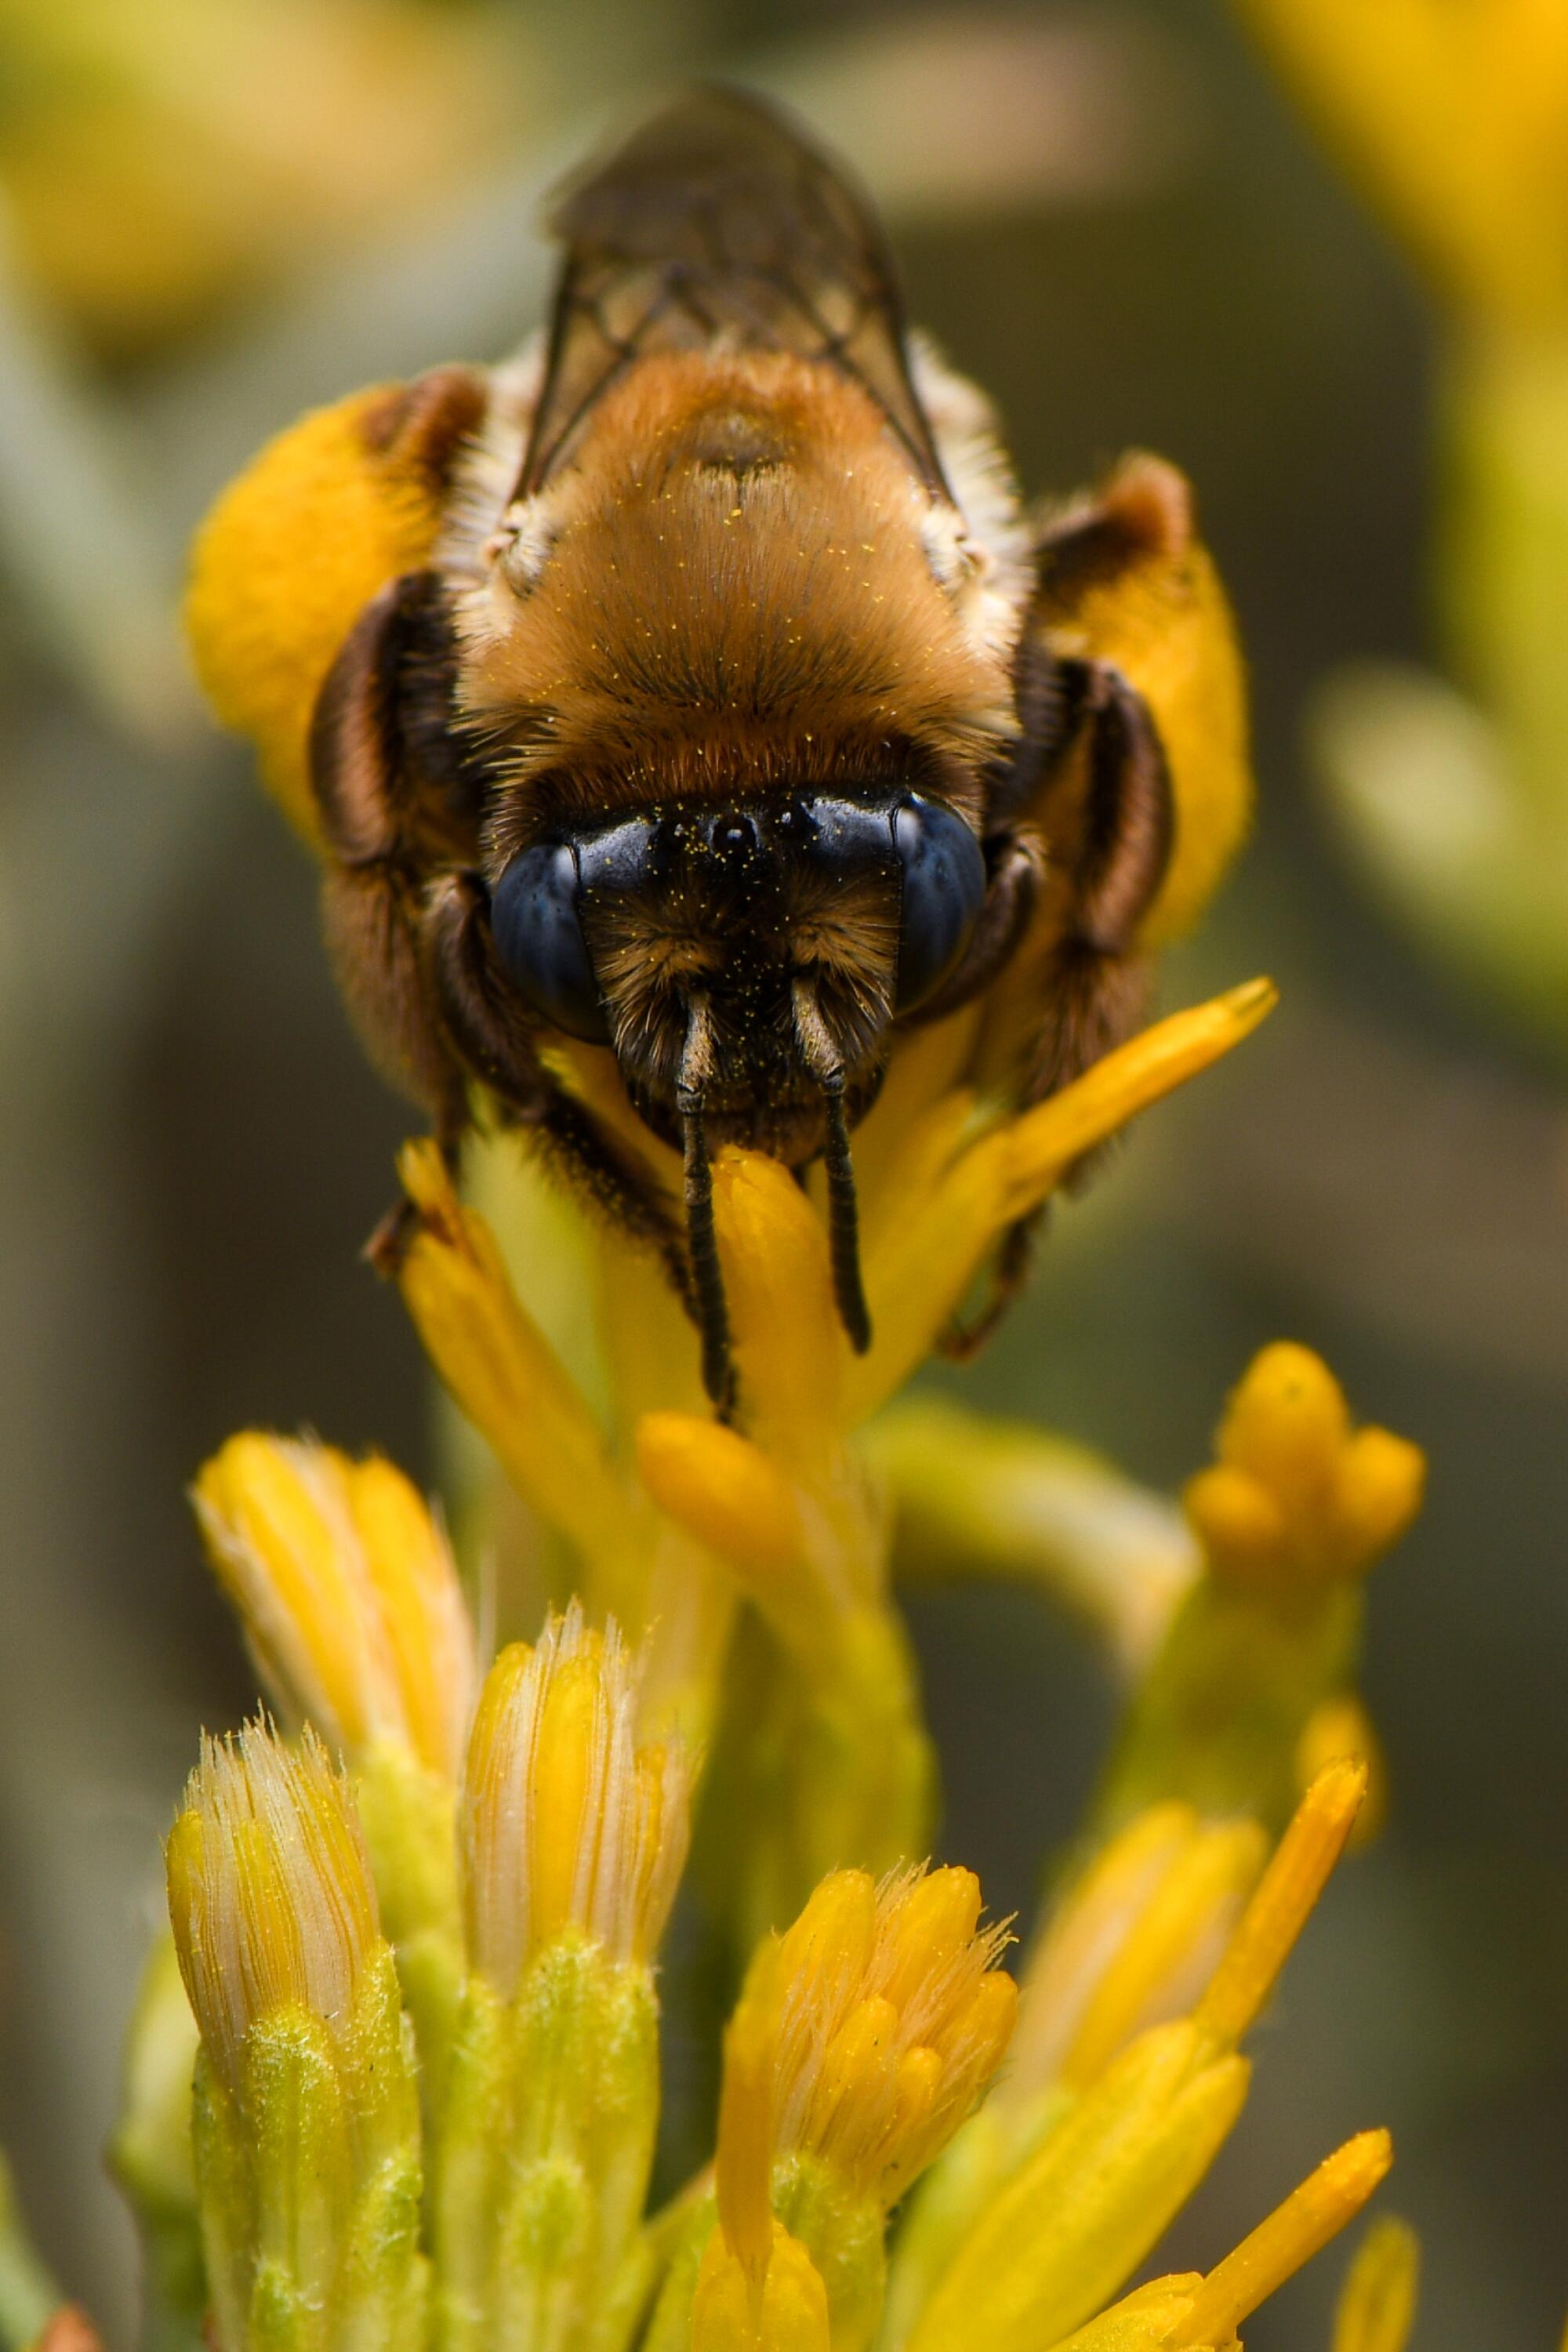 A head-on closeup of a bee on a yellow flower.